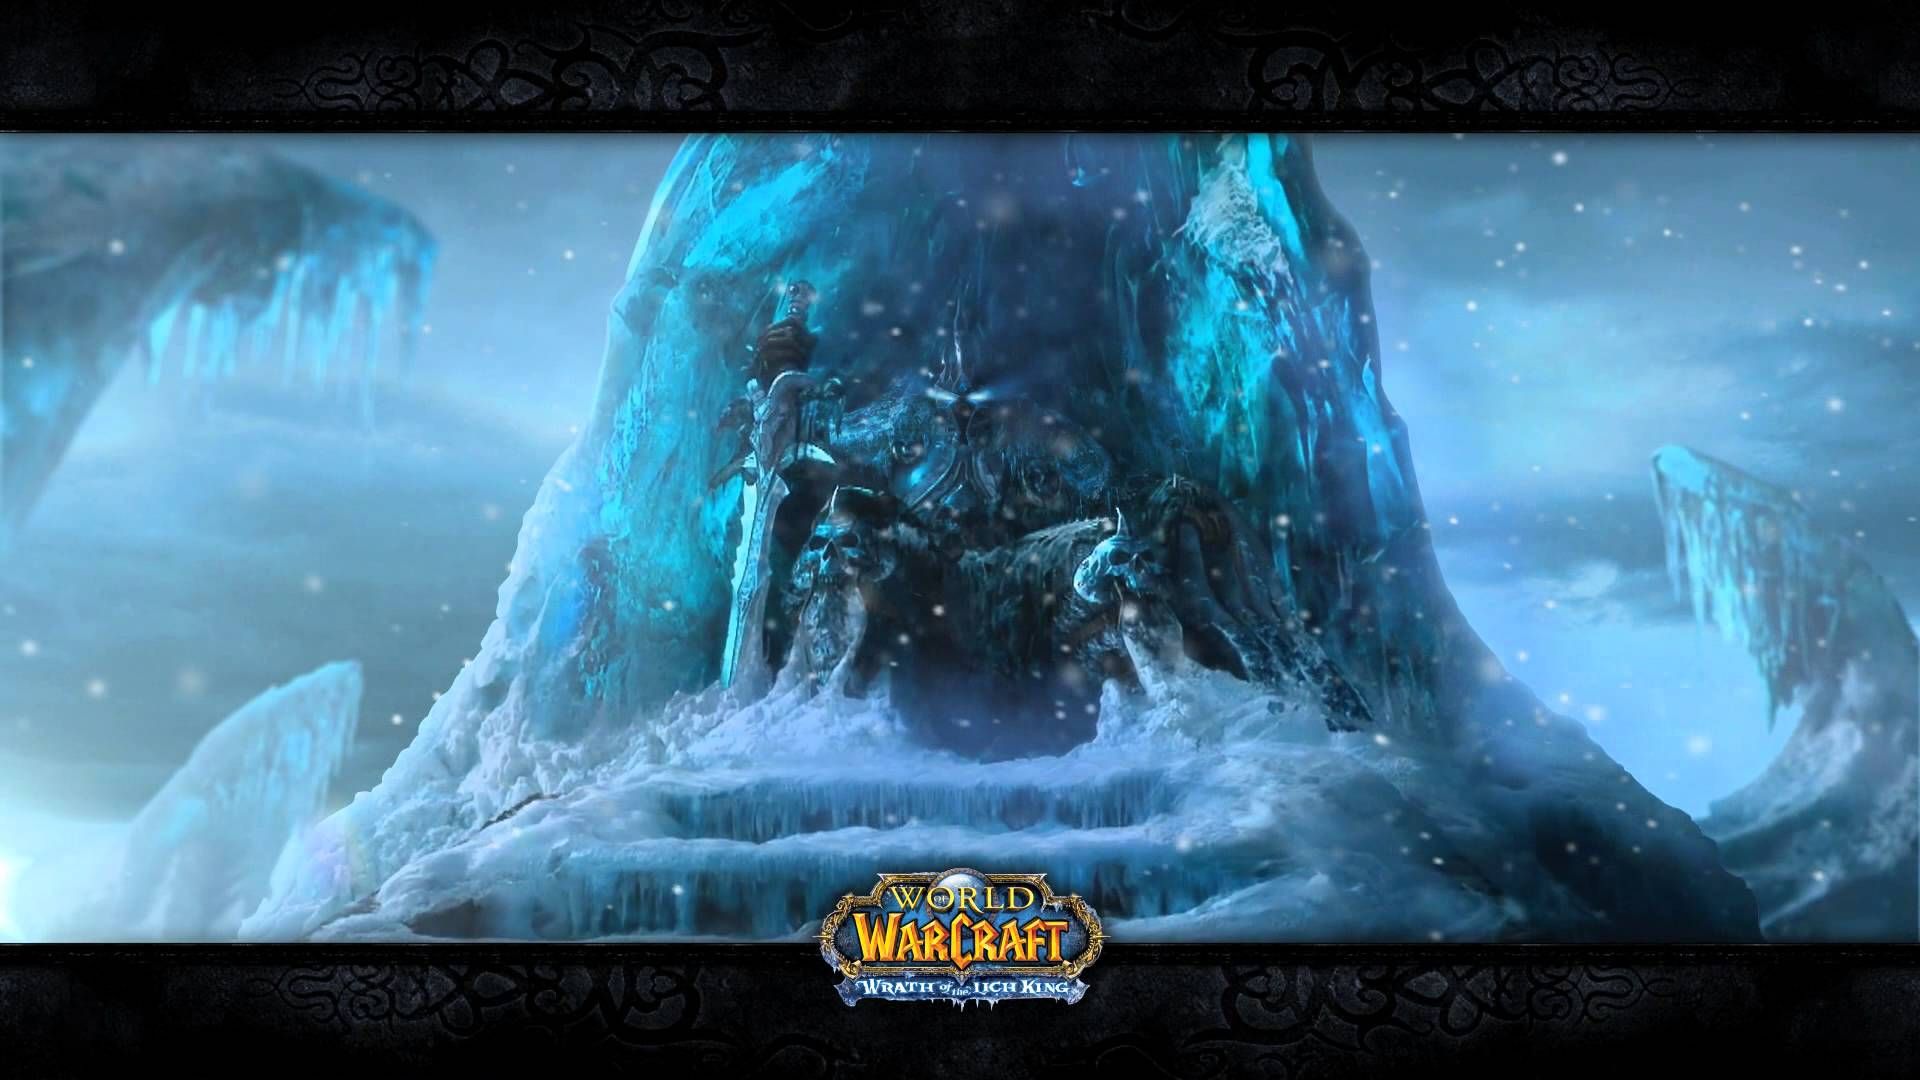 Found This Cool Animated Lich King Wallpaper - Anaheim Convention Center , HD Wallpaper & Backgrounds